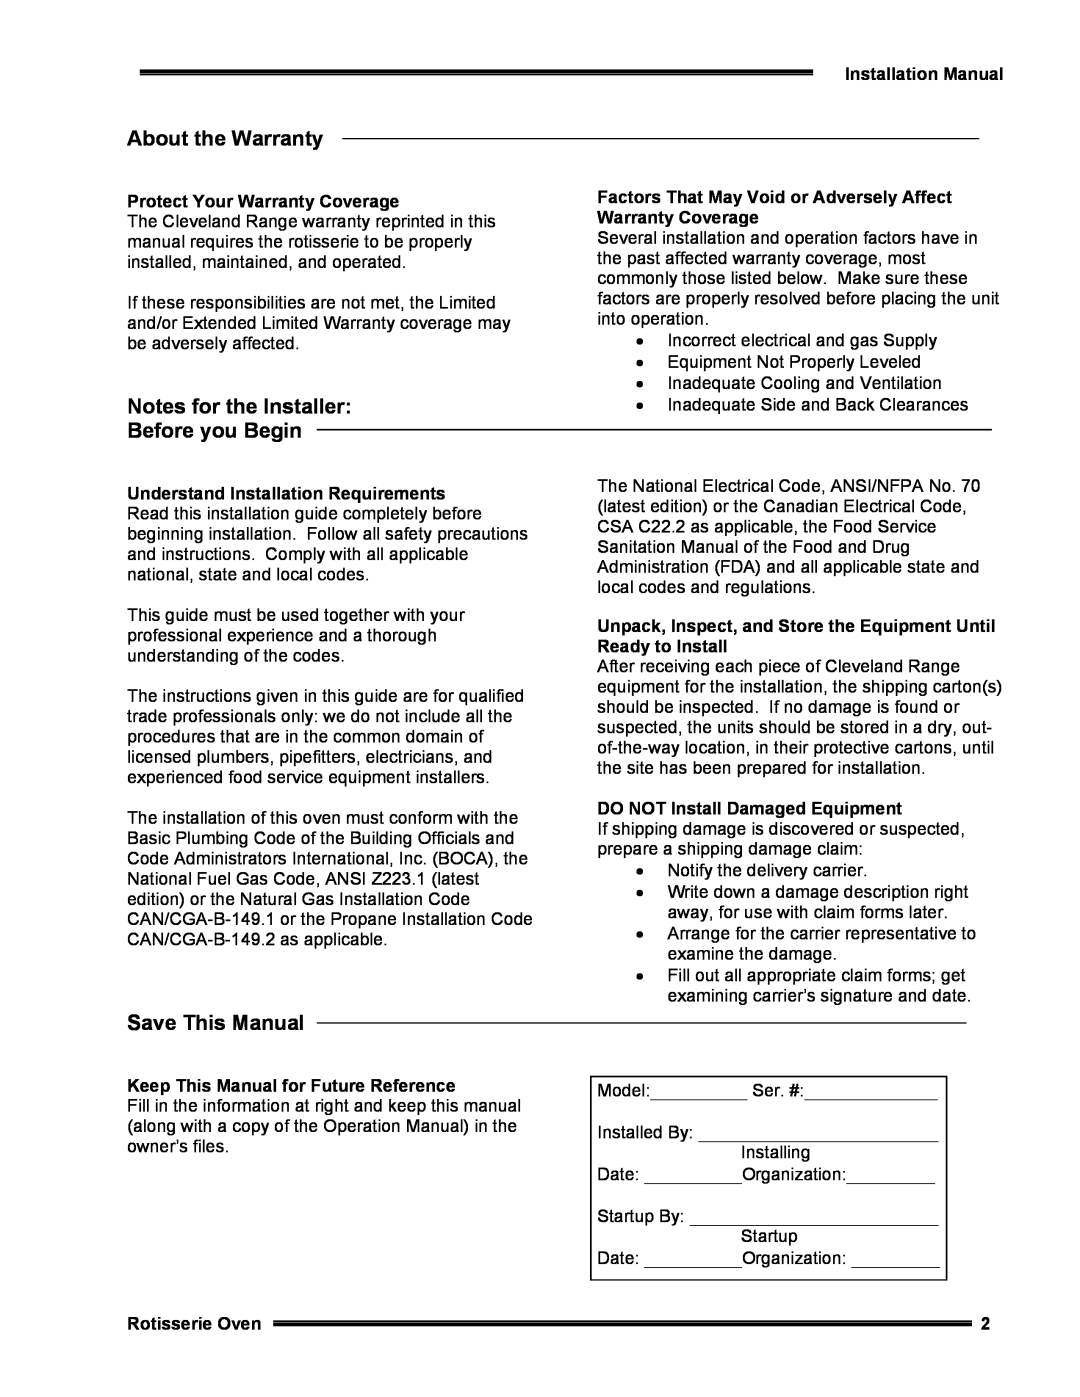 Cleveland Range CR32 About the Warranty, Notes for the Installer, Before you Begin, Save This Manual, Warranty Coverage 